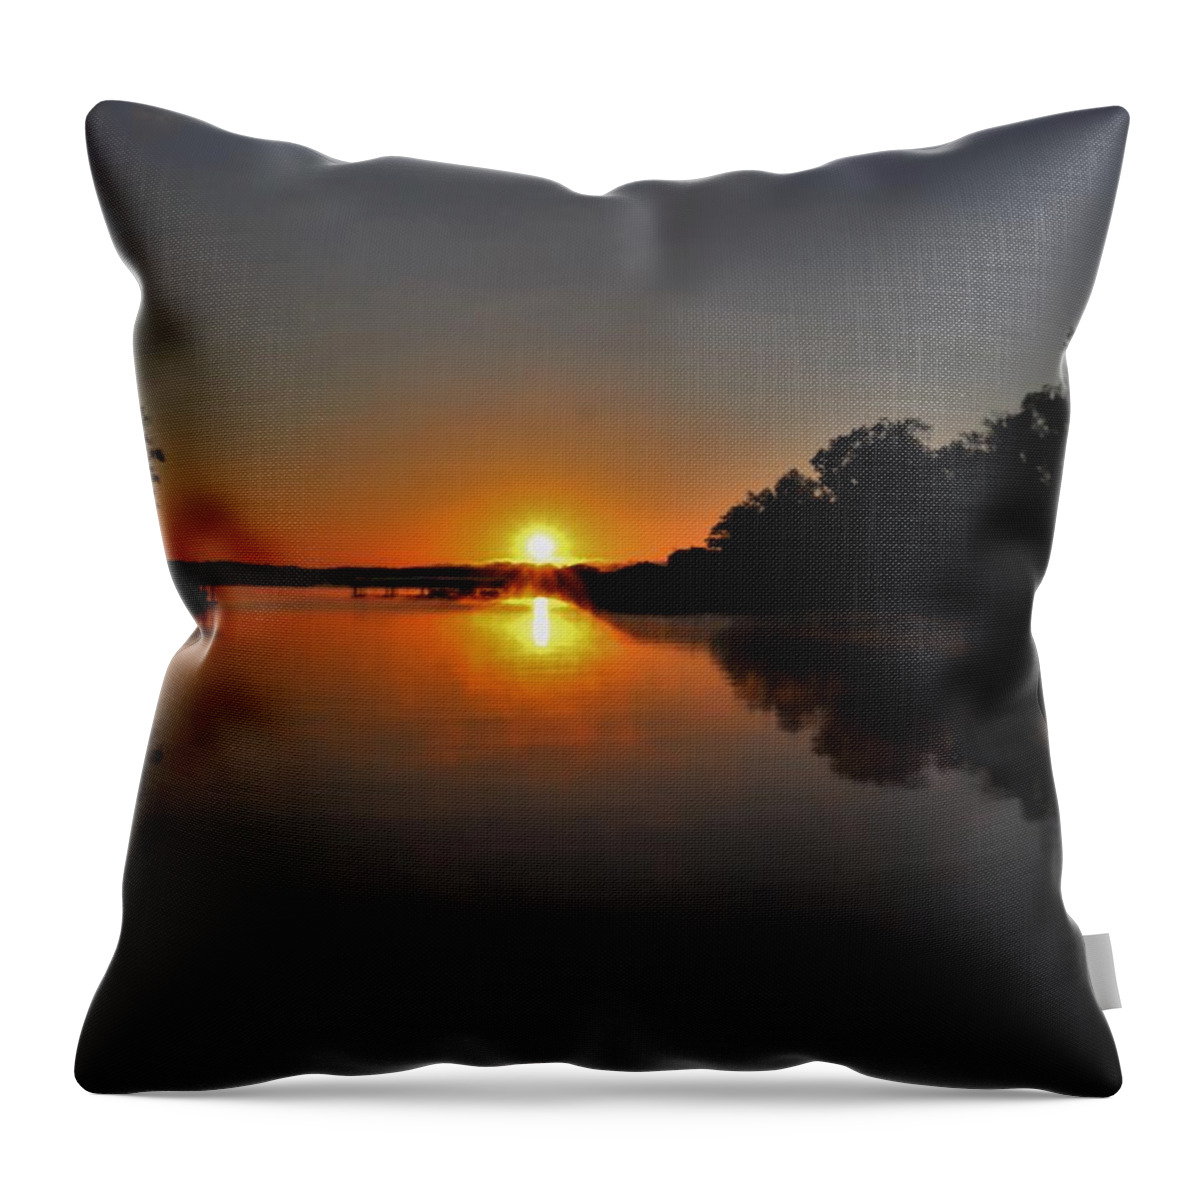 Sunrise Throw Pillow featuring the photograph Starring A Lake Sunrise by Ed Williams